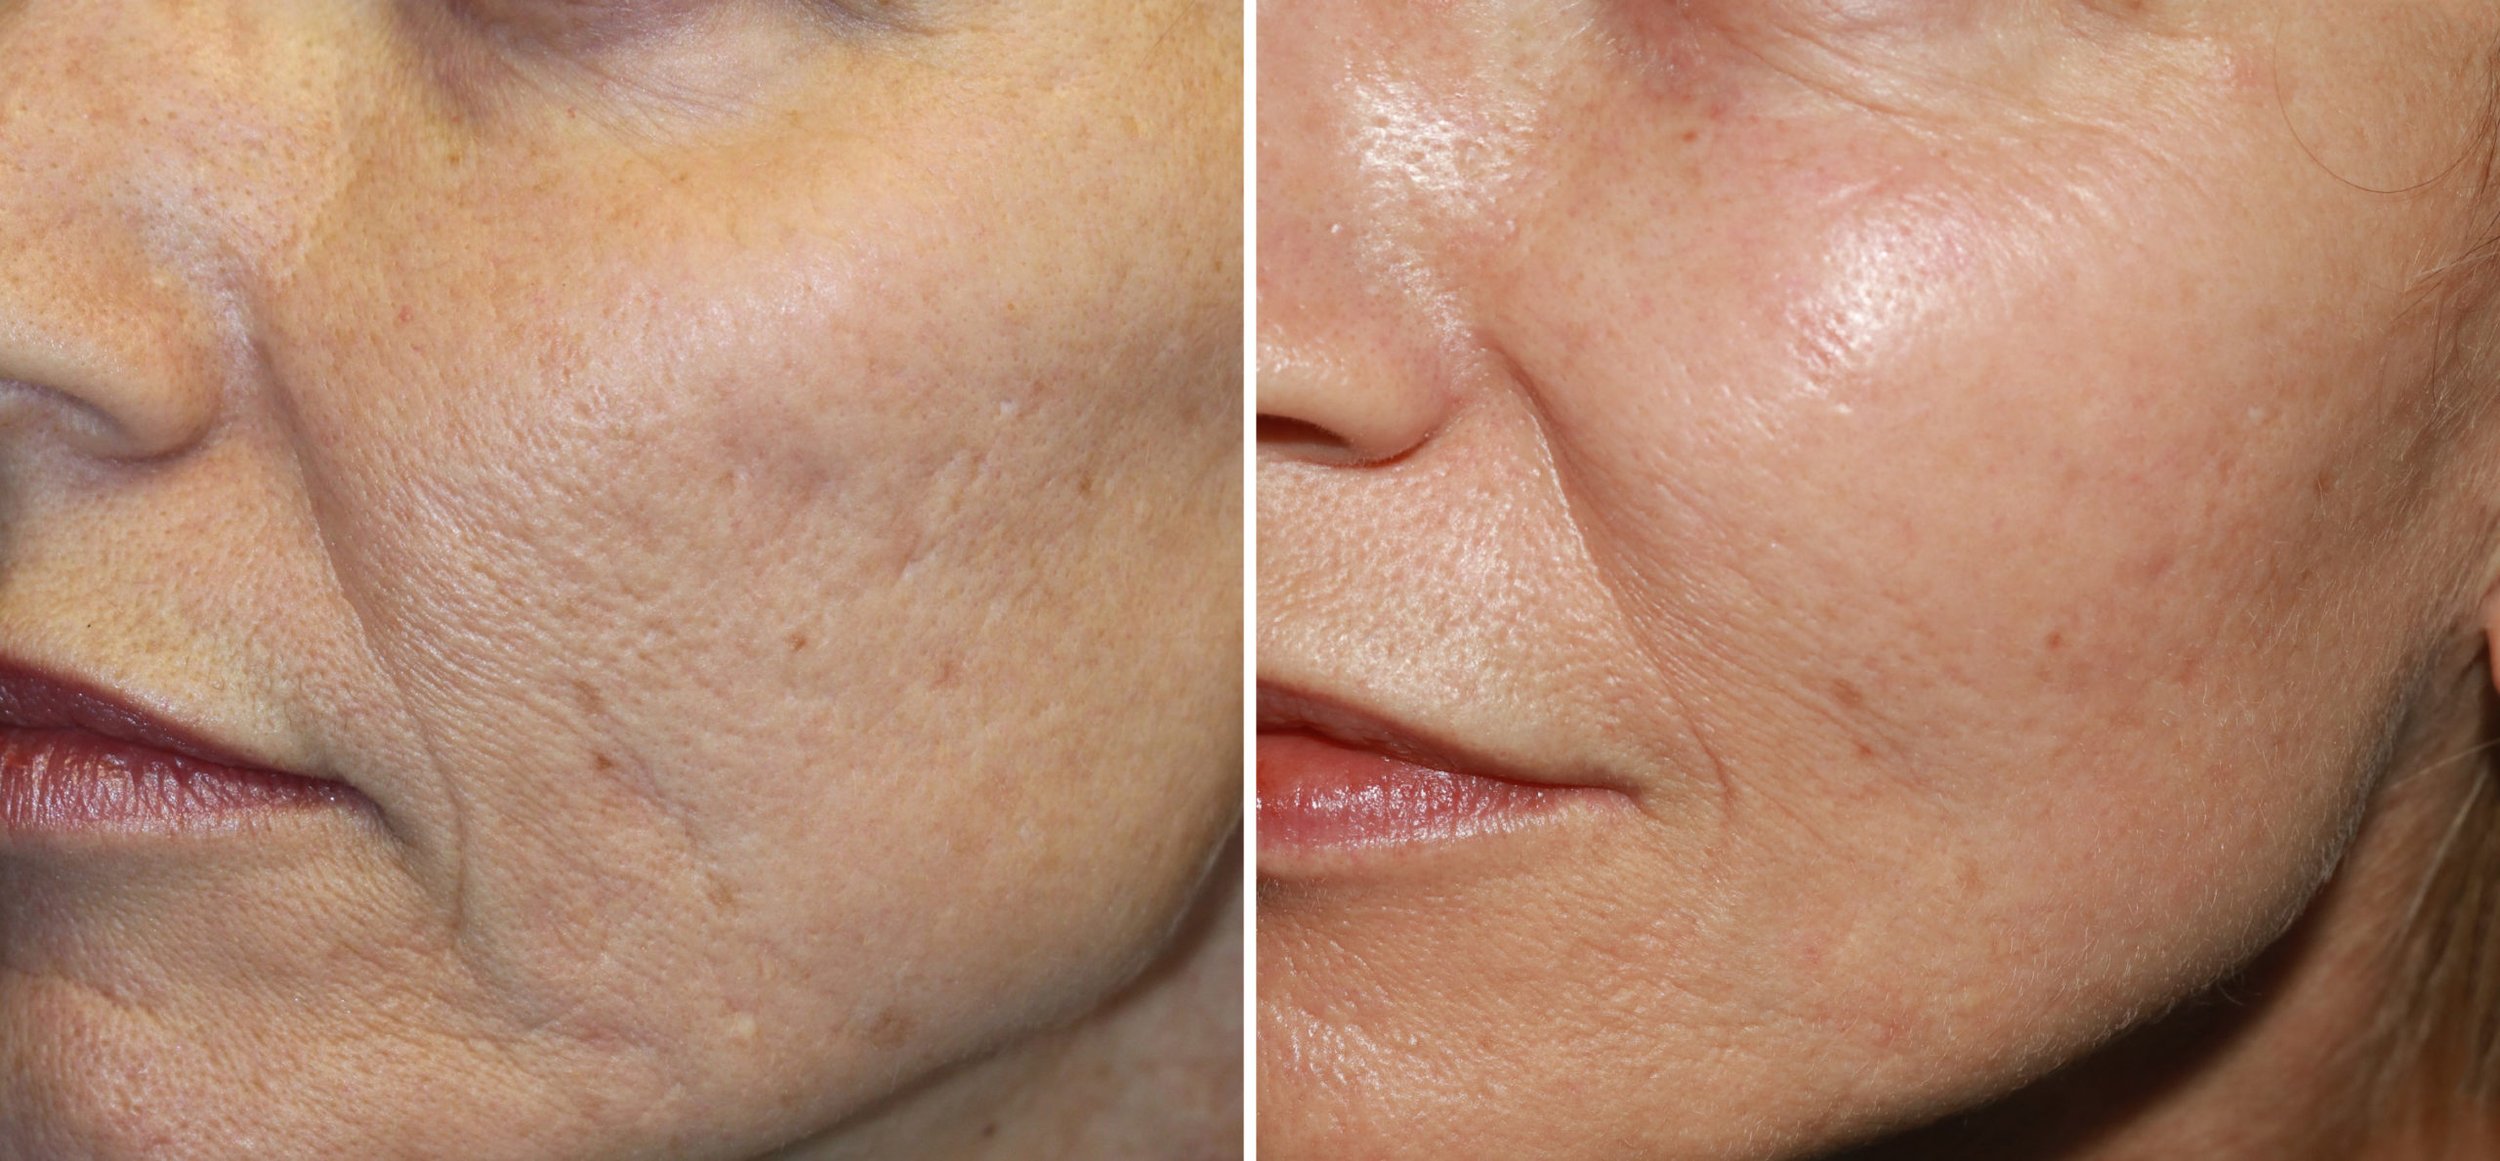 patient-14174-micro-needling-before-after-scaled.jpg